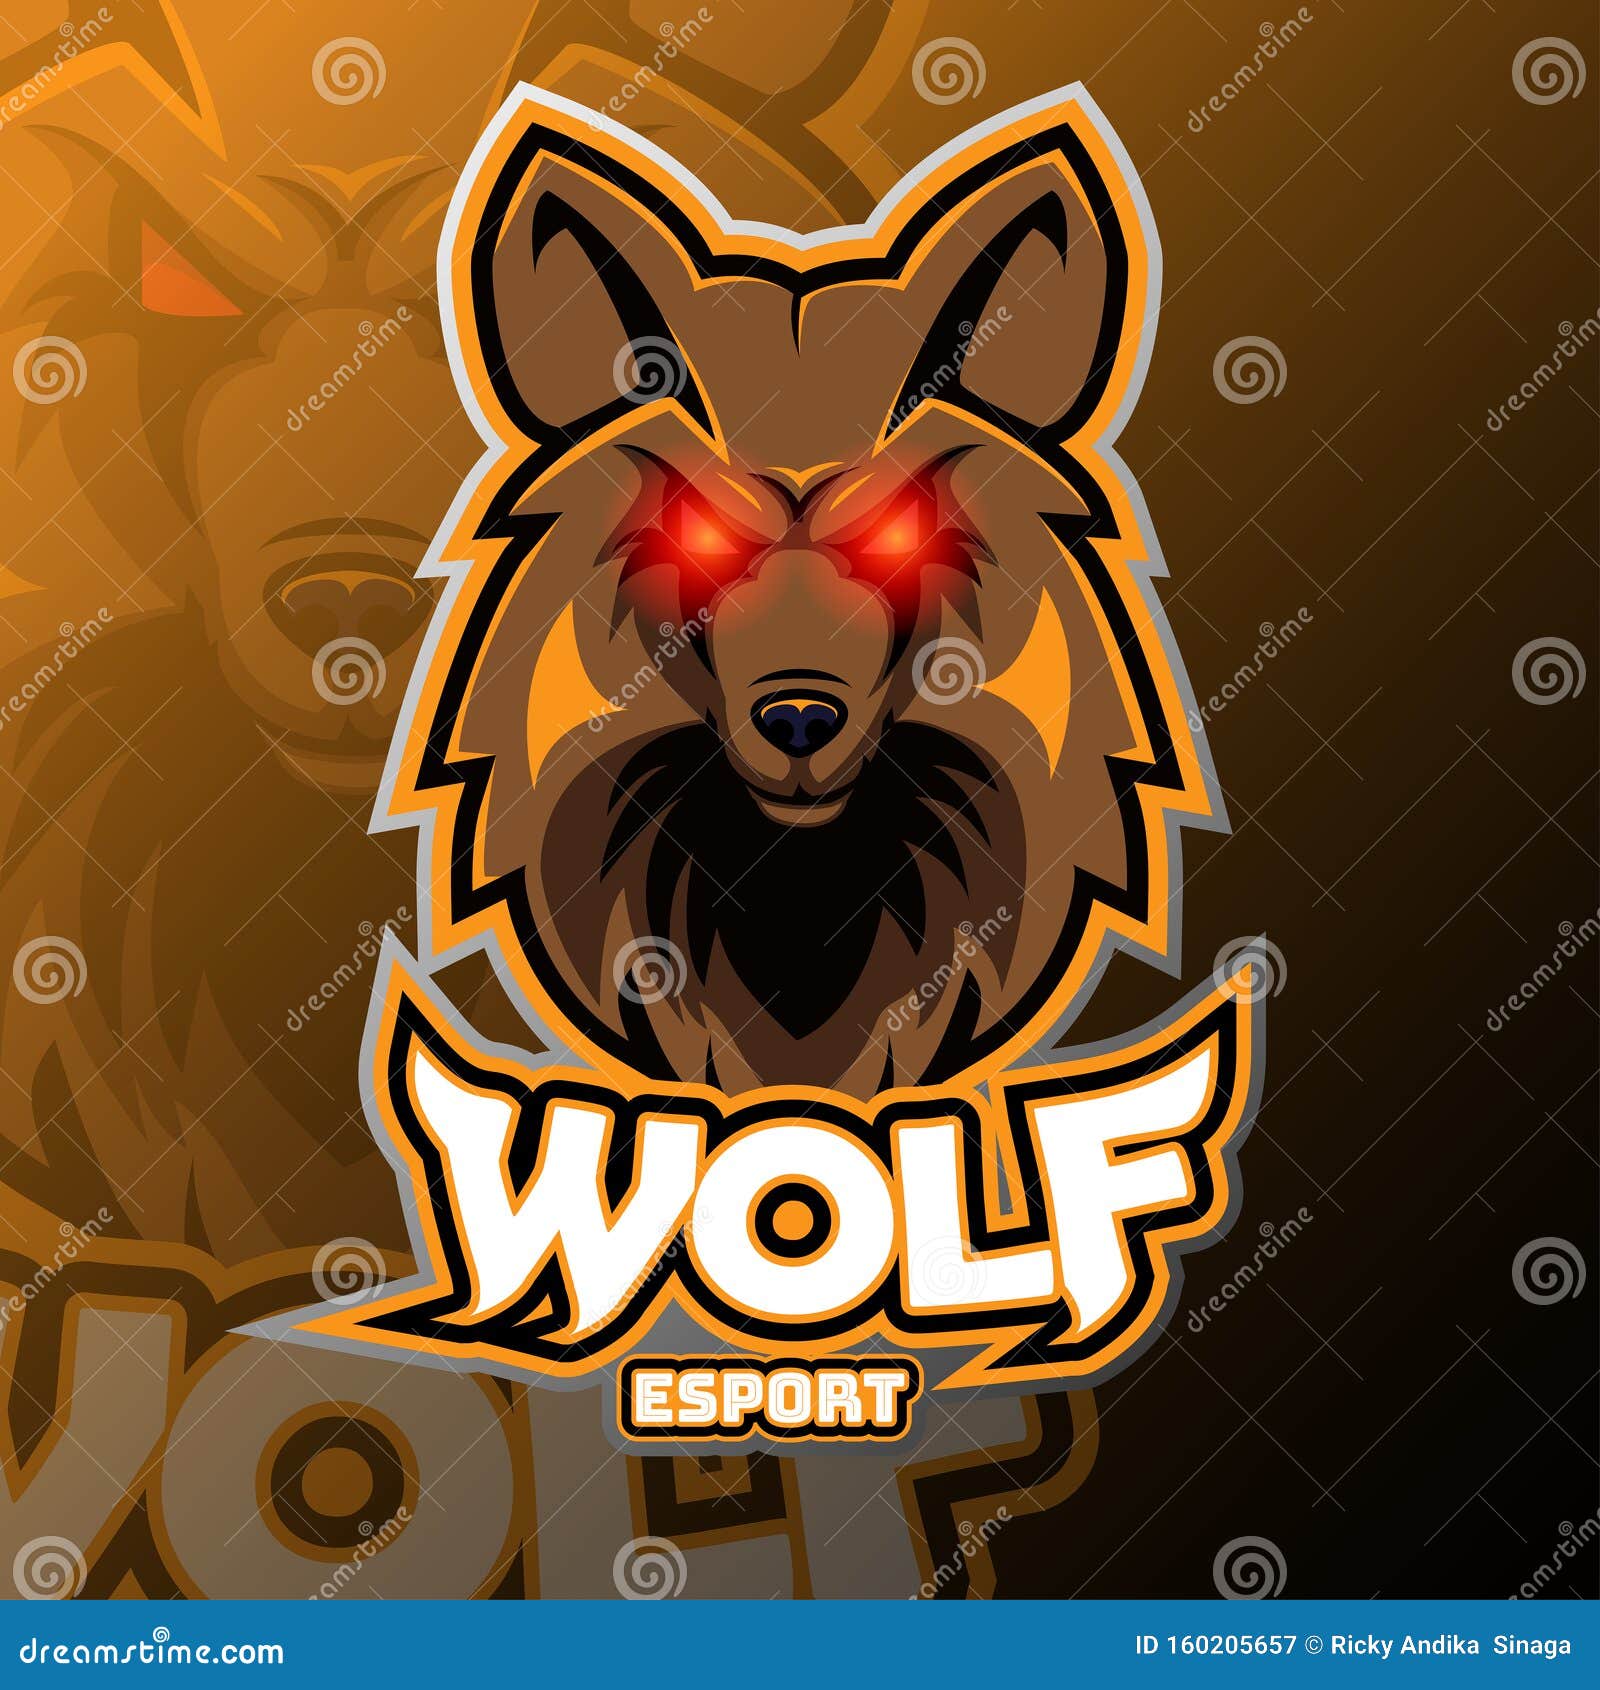 E-sports Team Logo Design with Wolf Free Vector Stock Vector - Illustration  of company, community: 160205657